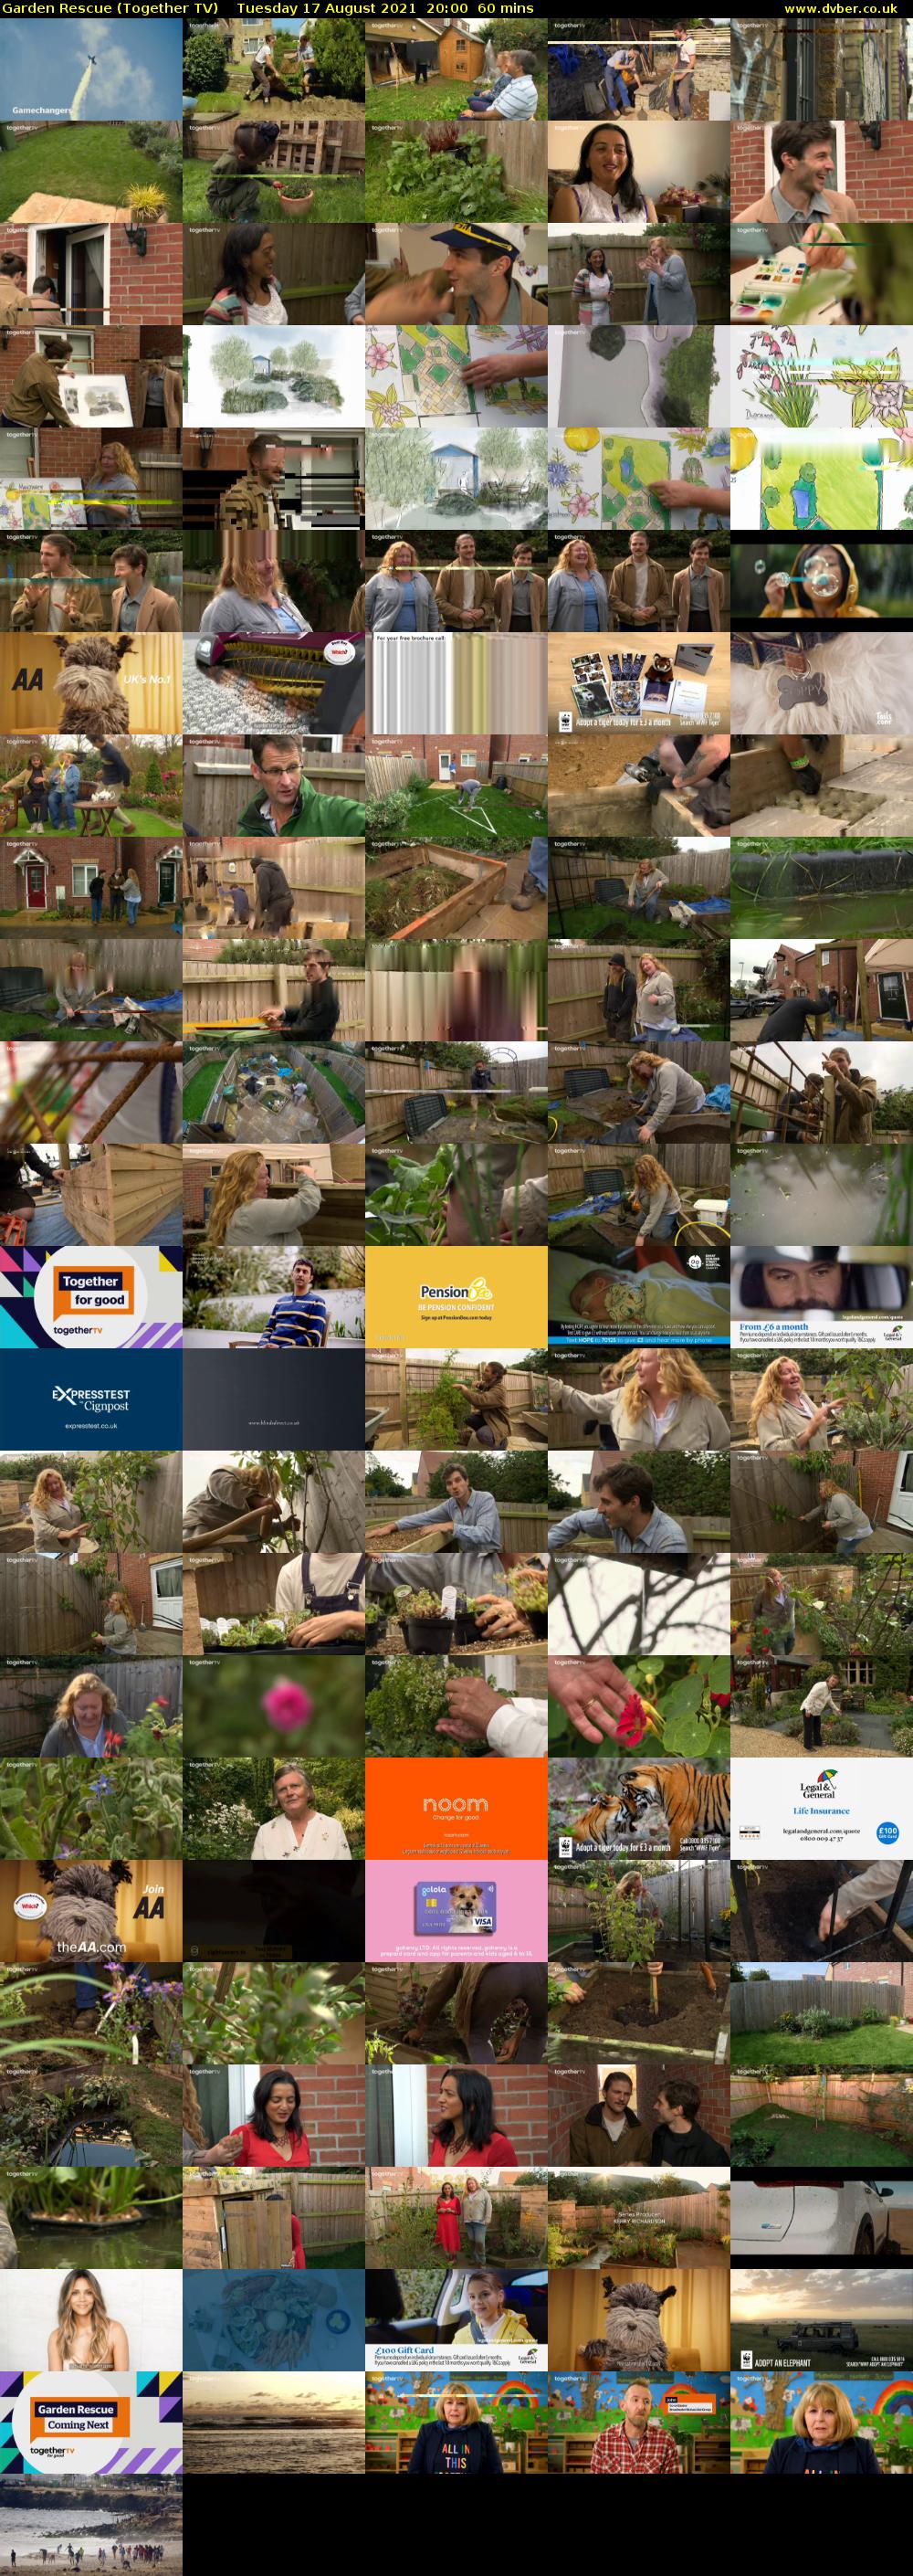 Garden Rescue (Together TV) Tuesday 17 August 2021 20:00 - 21:00